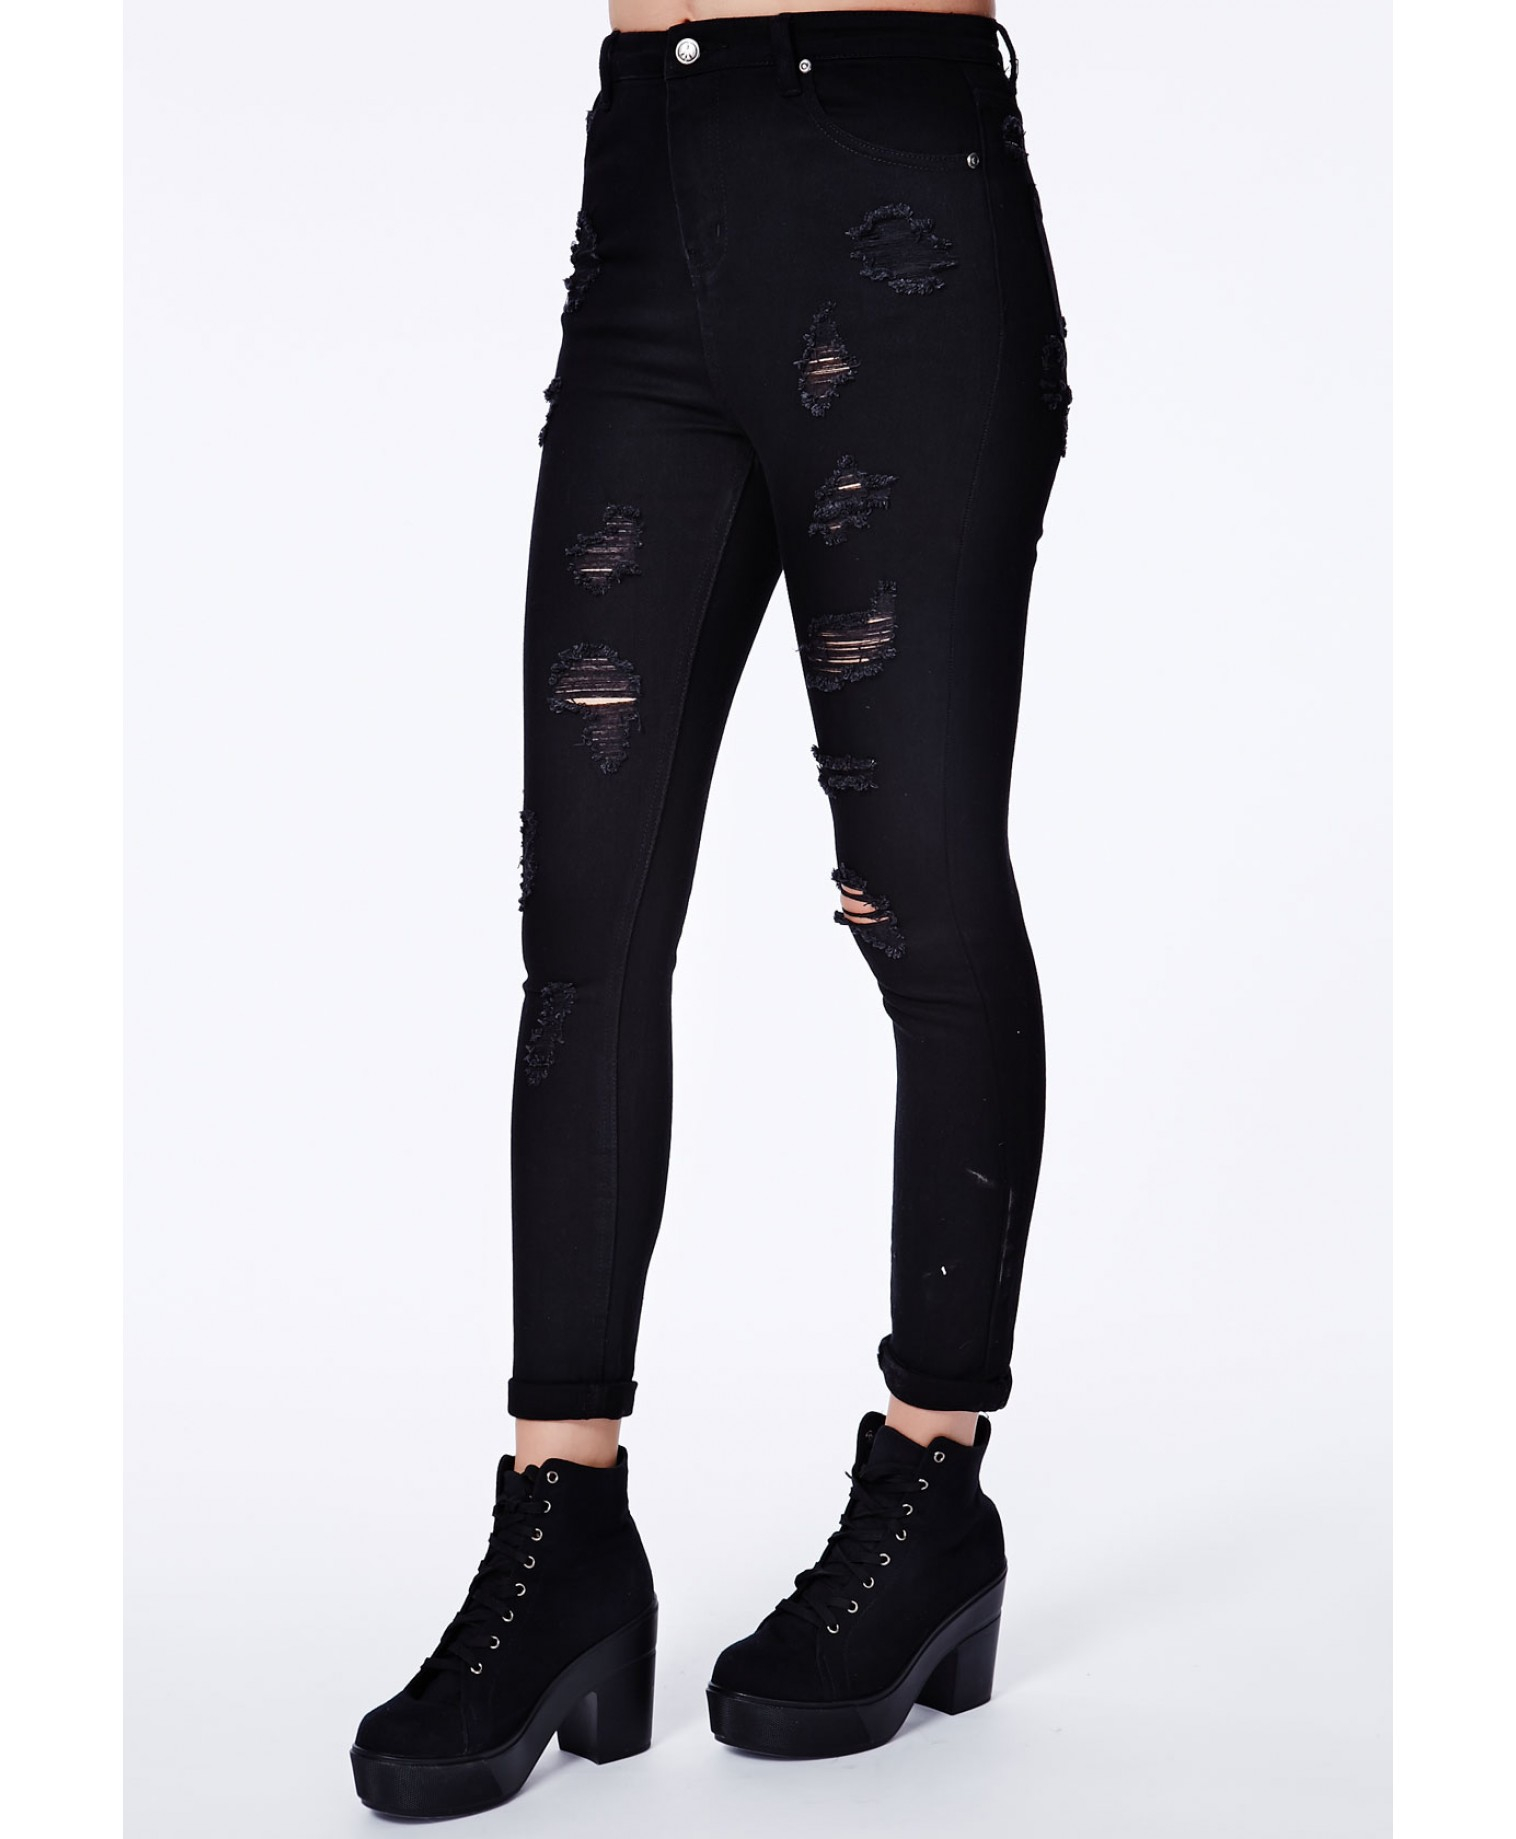 Missguided Edie High Waist Extreme Ripped Skinny Jeans In Black in